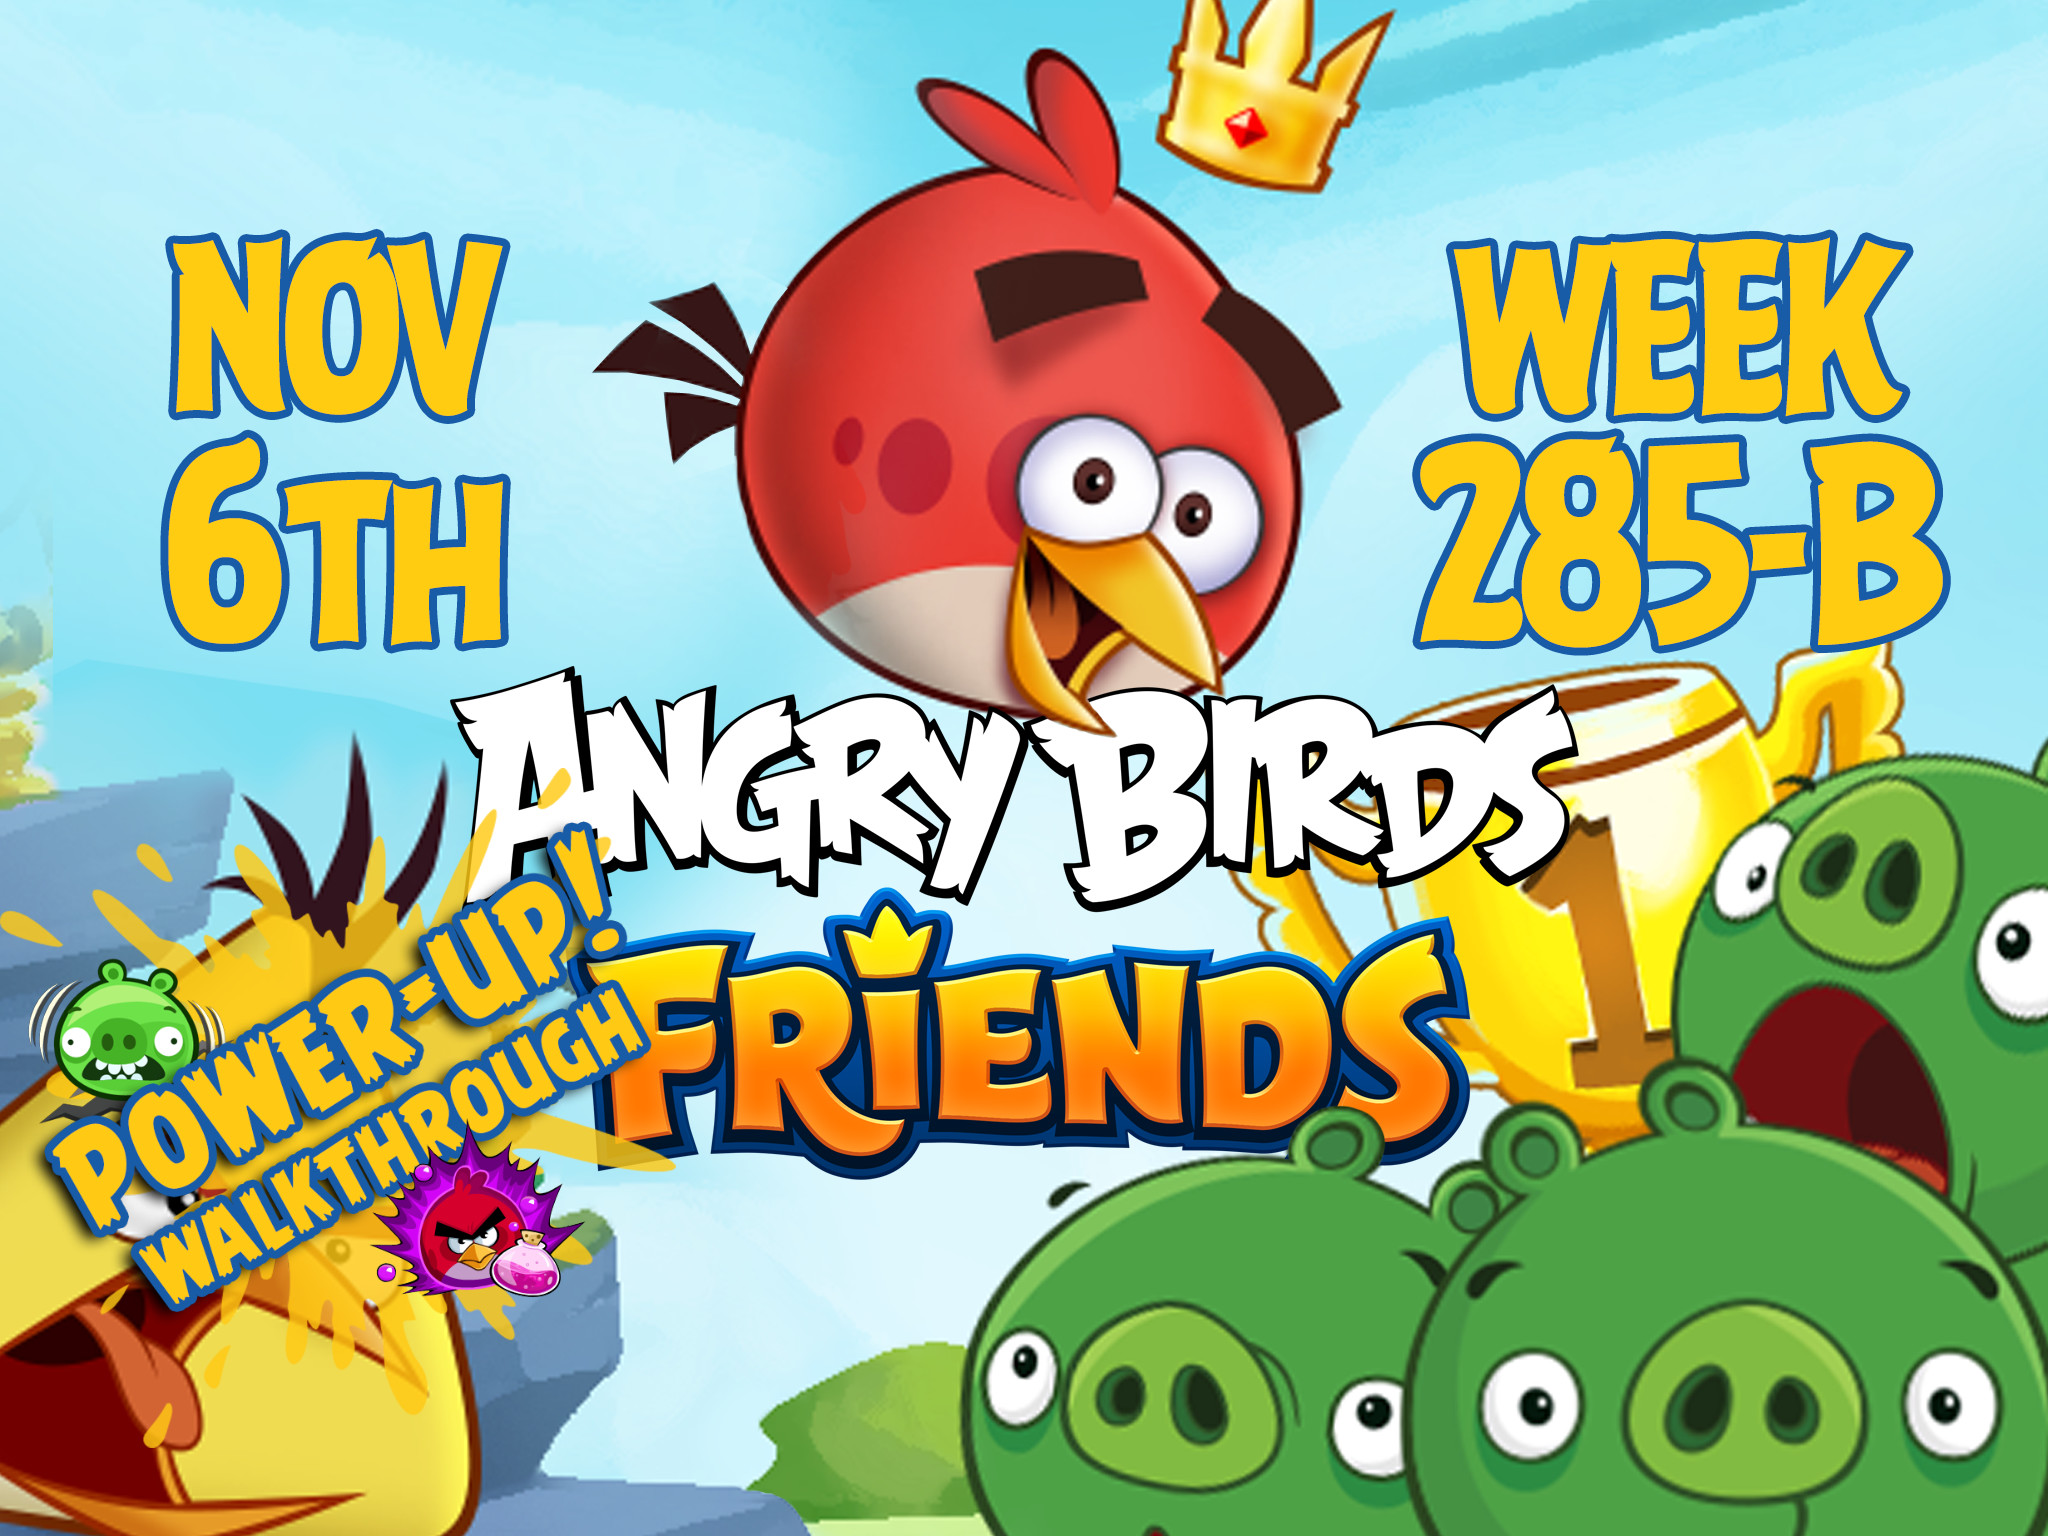 Angry Birds Friends Tournament Week 285-B Feature Image PU